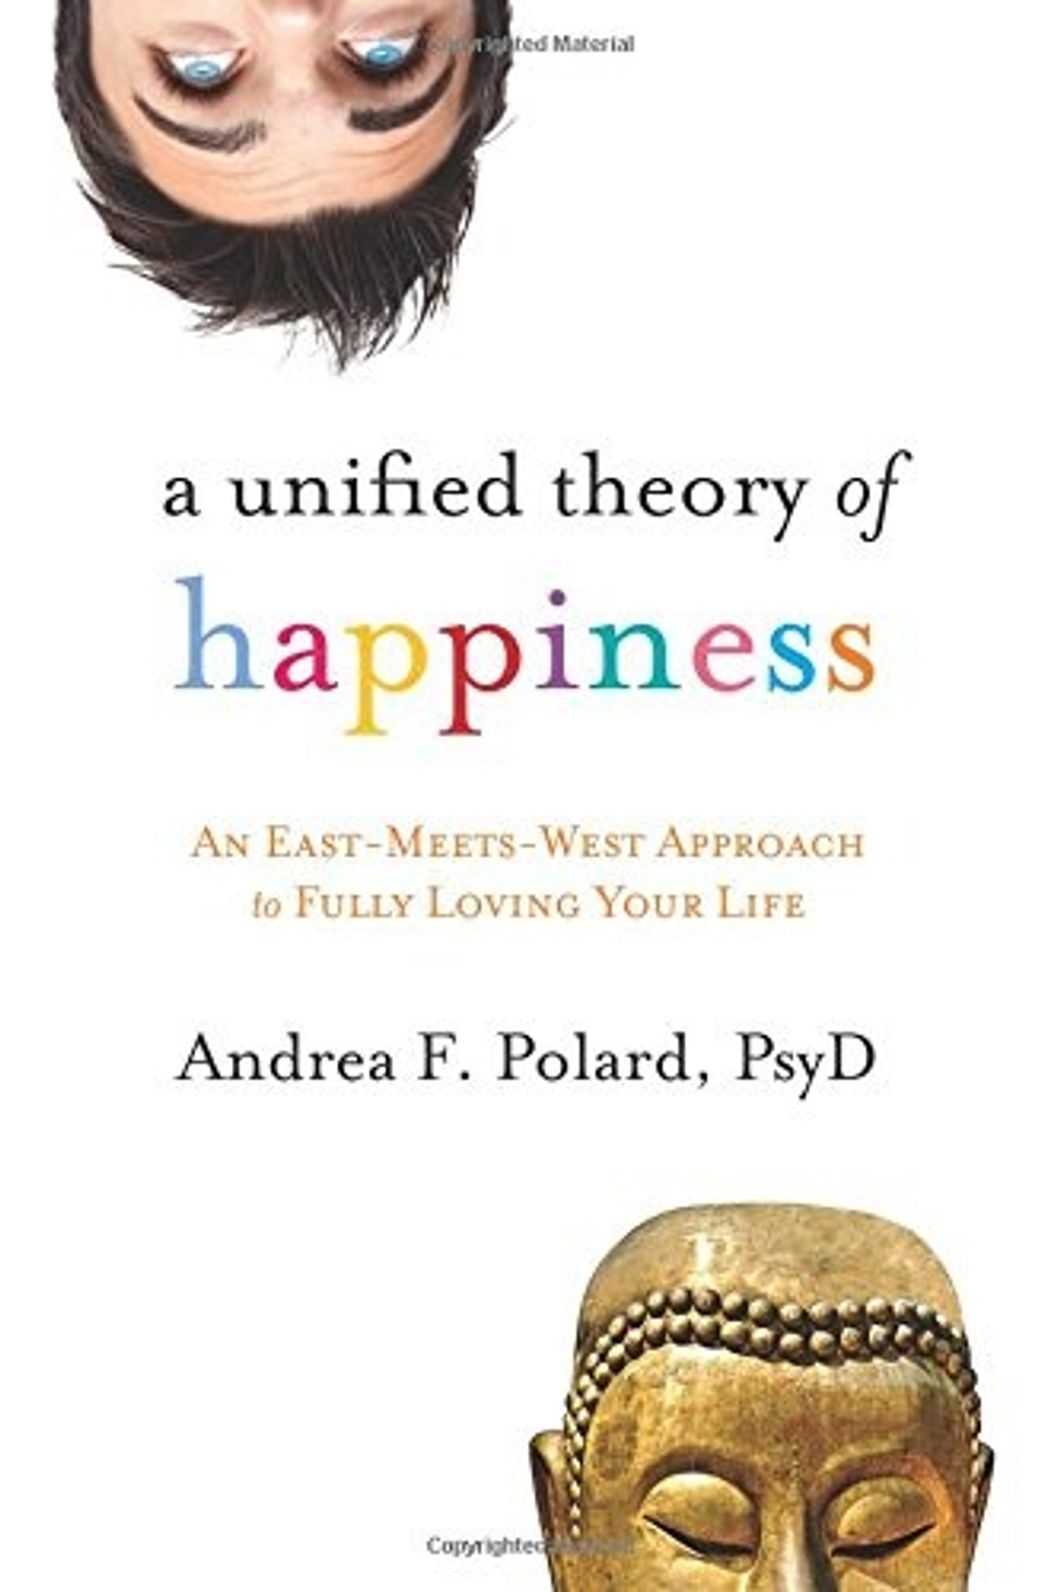 A Theory On Happiness